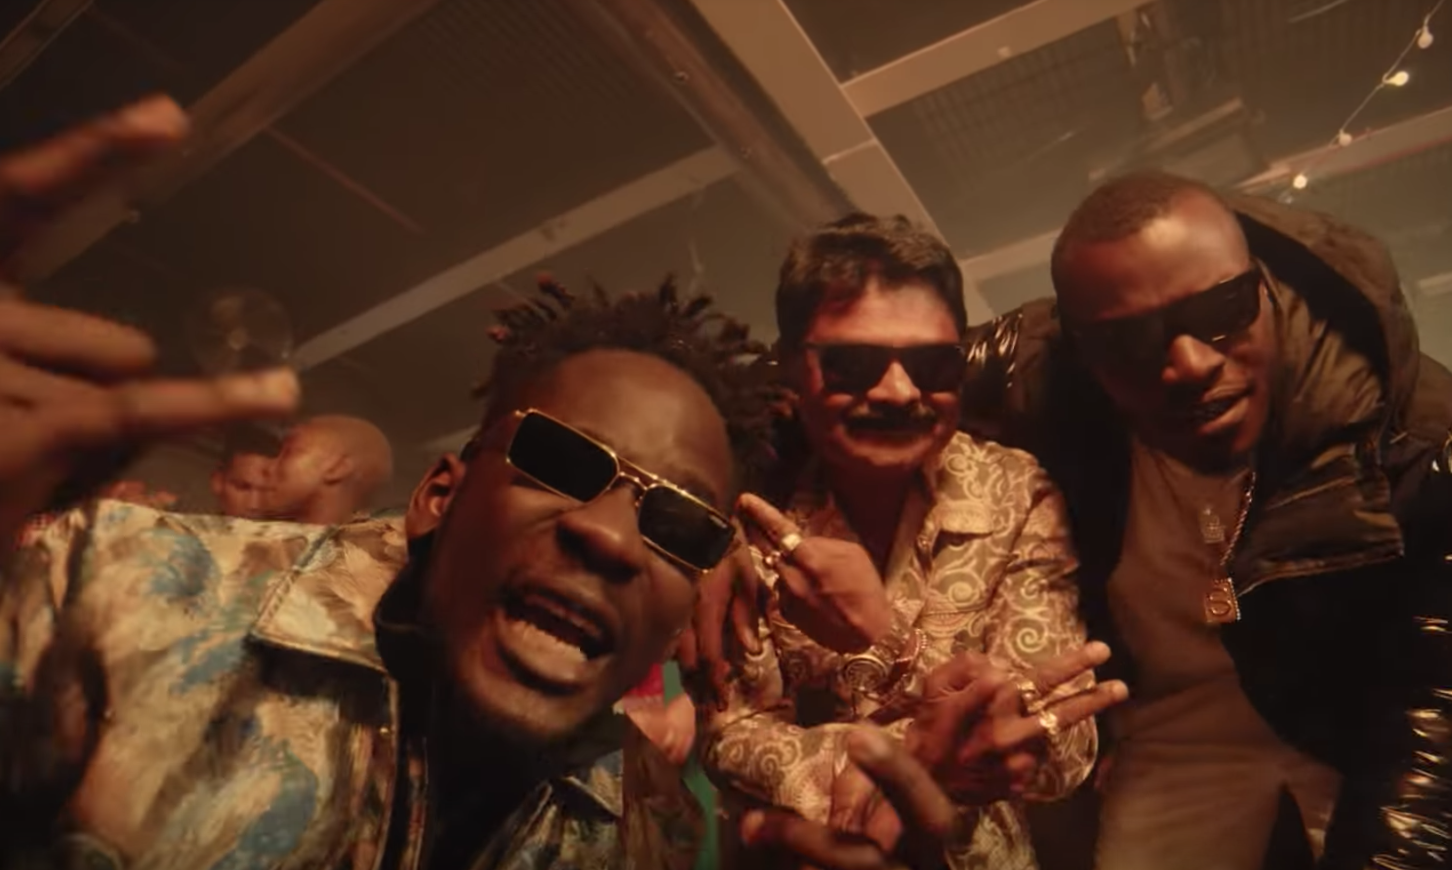 VIDEO: Mr Eazi – Chicken Curry Ft. Sneakbo & Just Sul